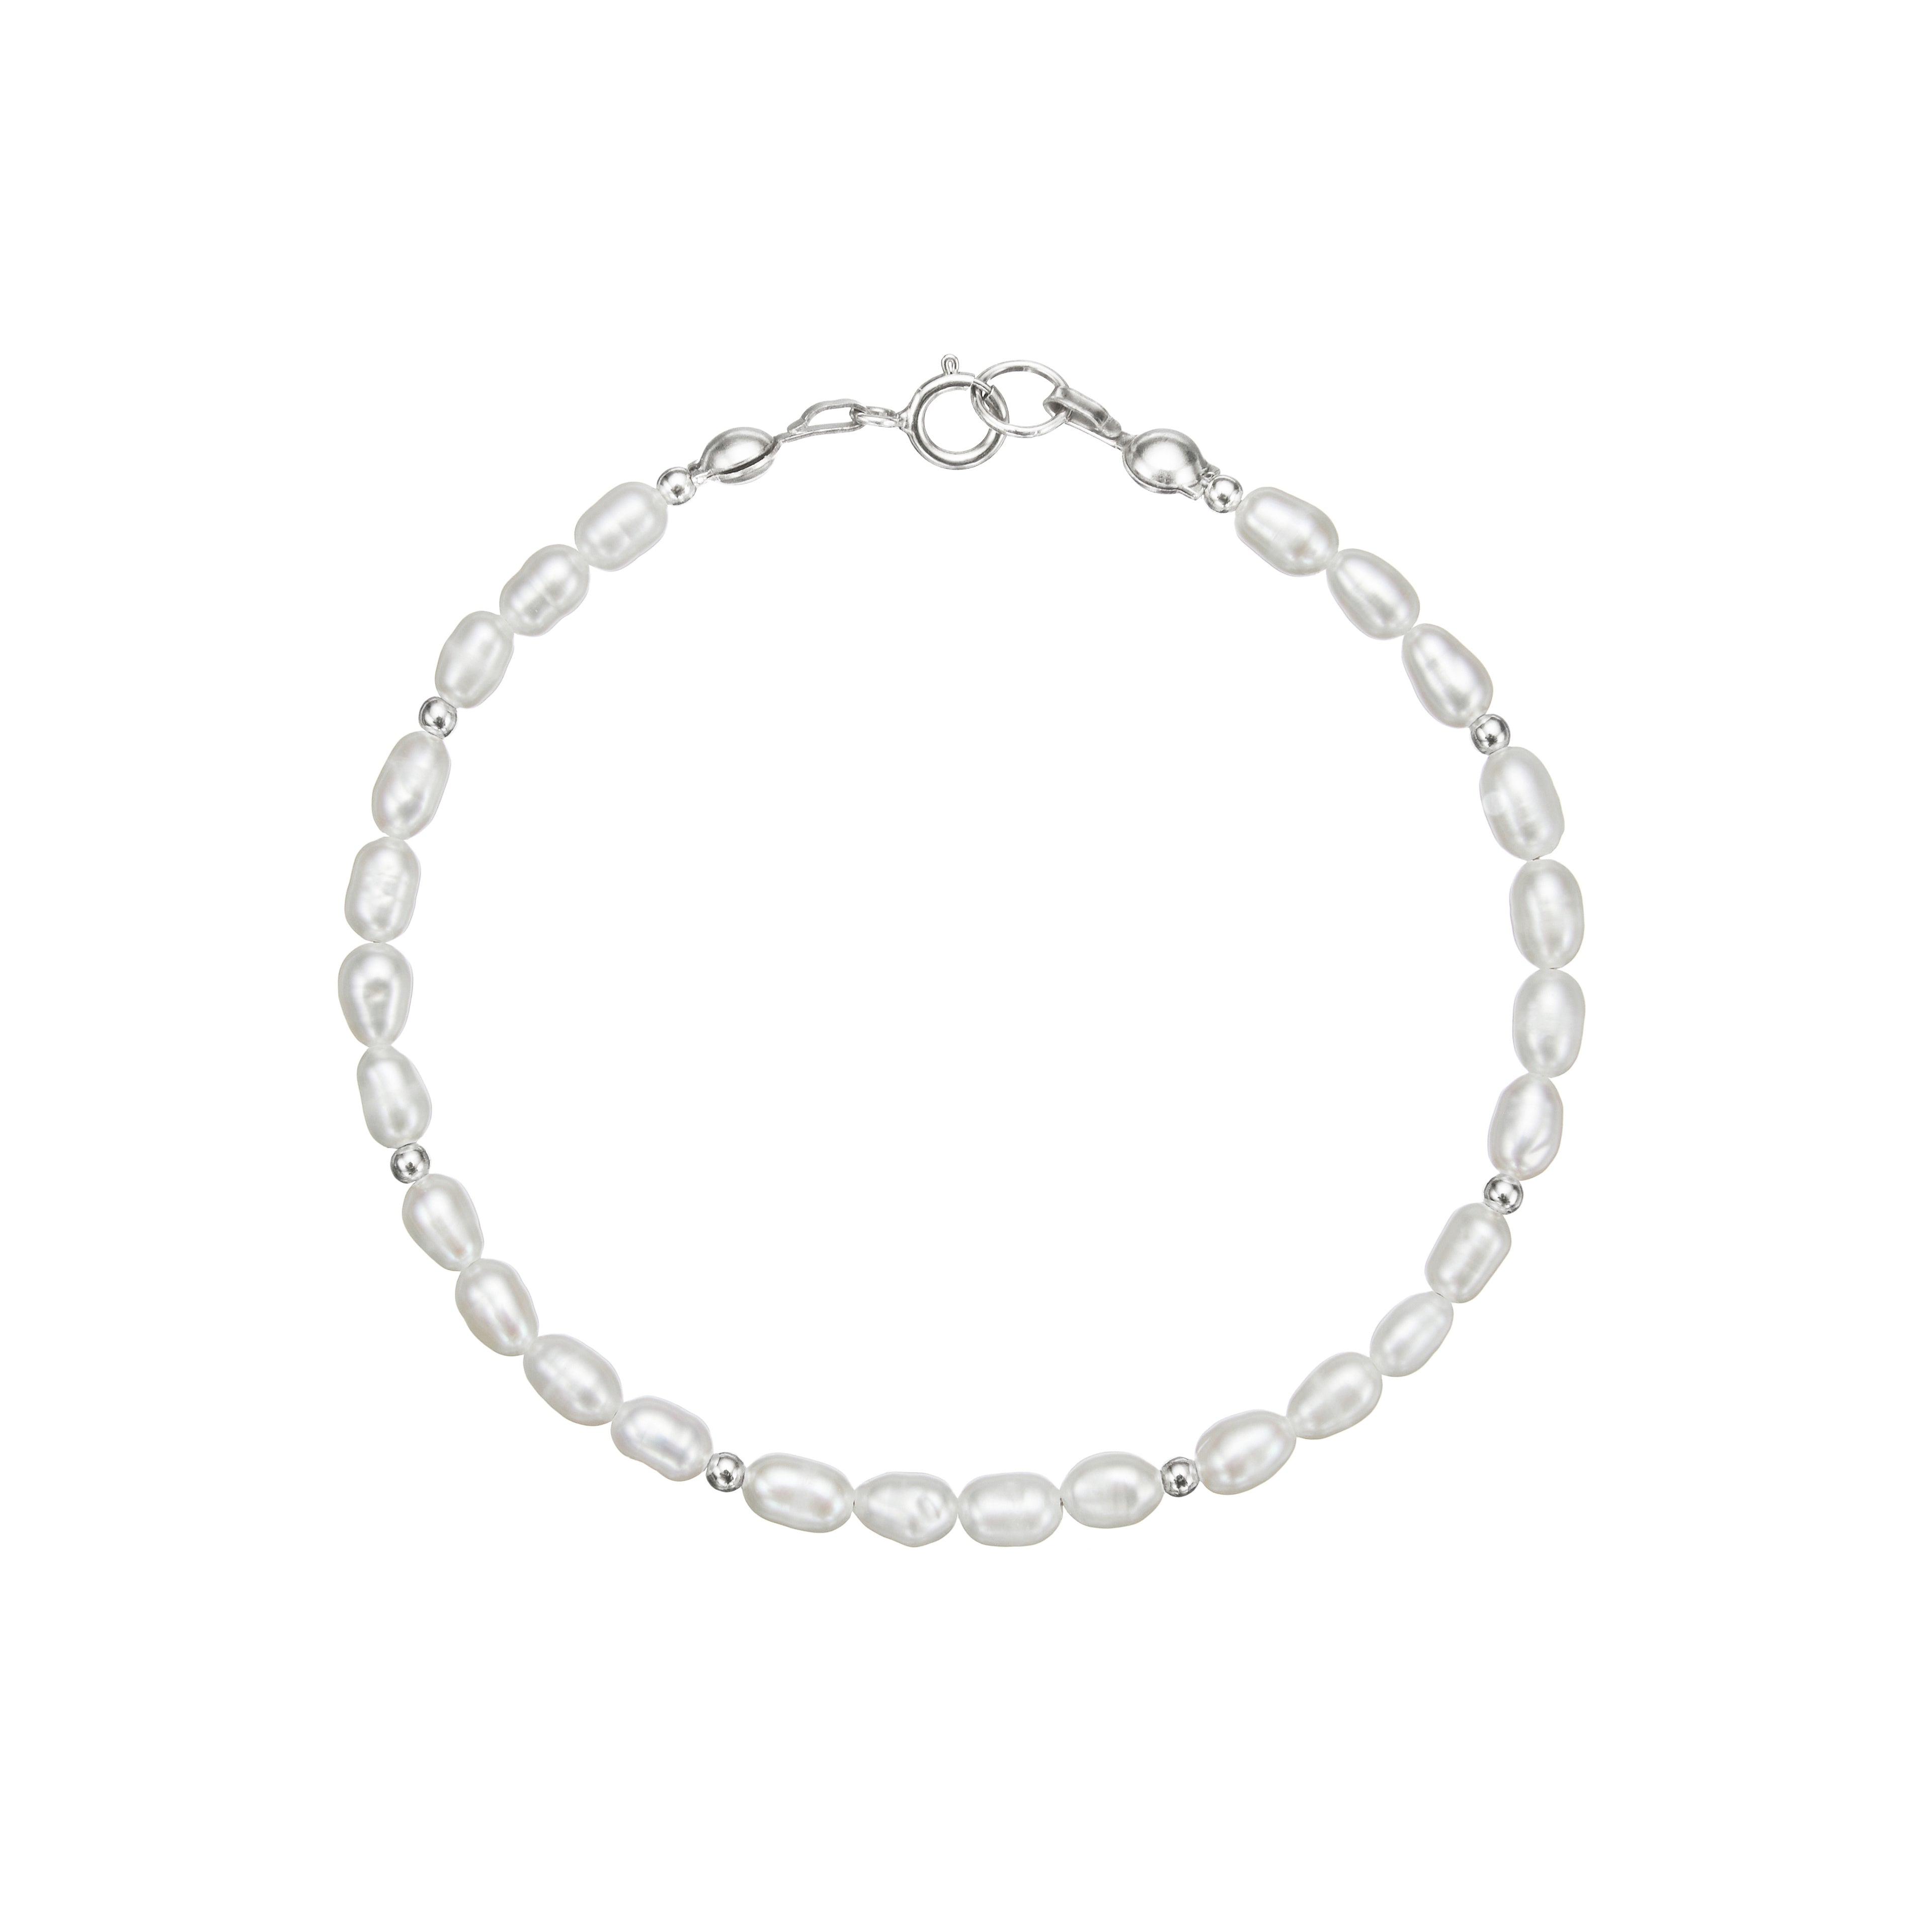 Silver beaded seed pearl bracelet on a white background